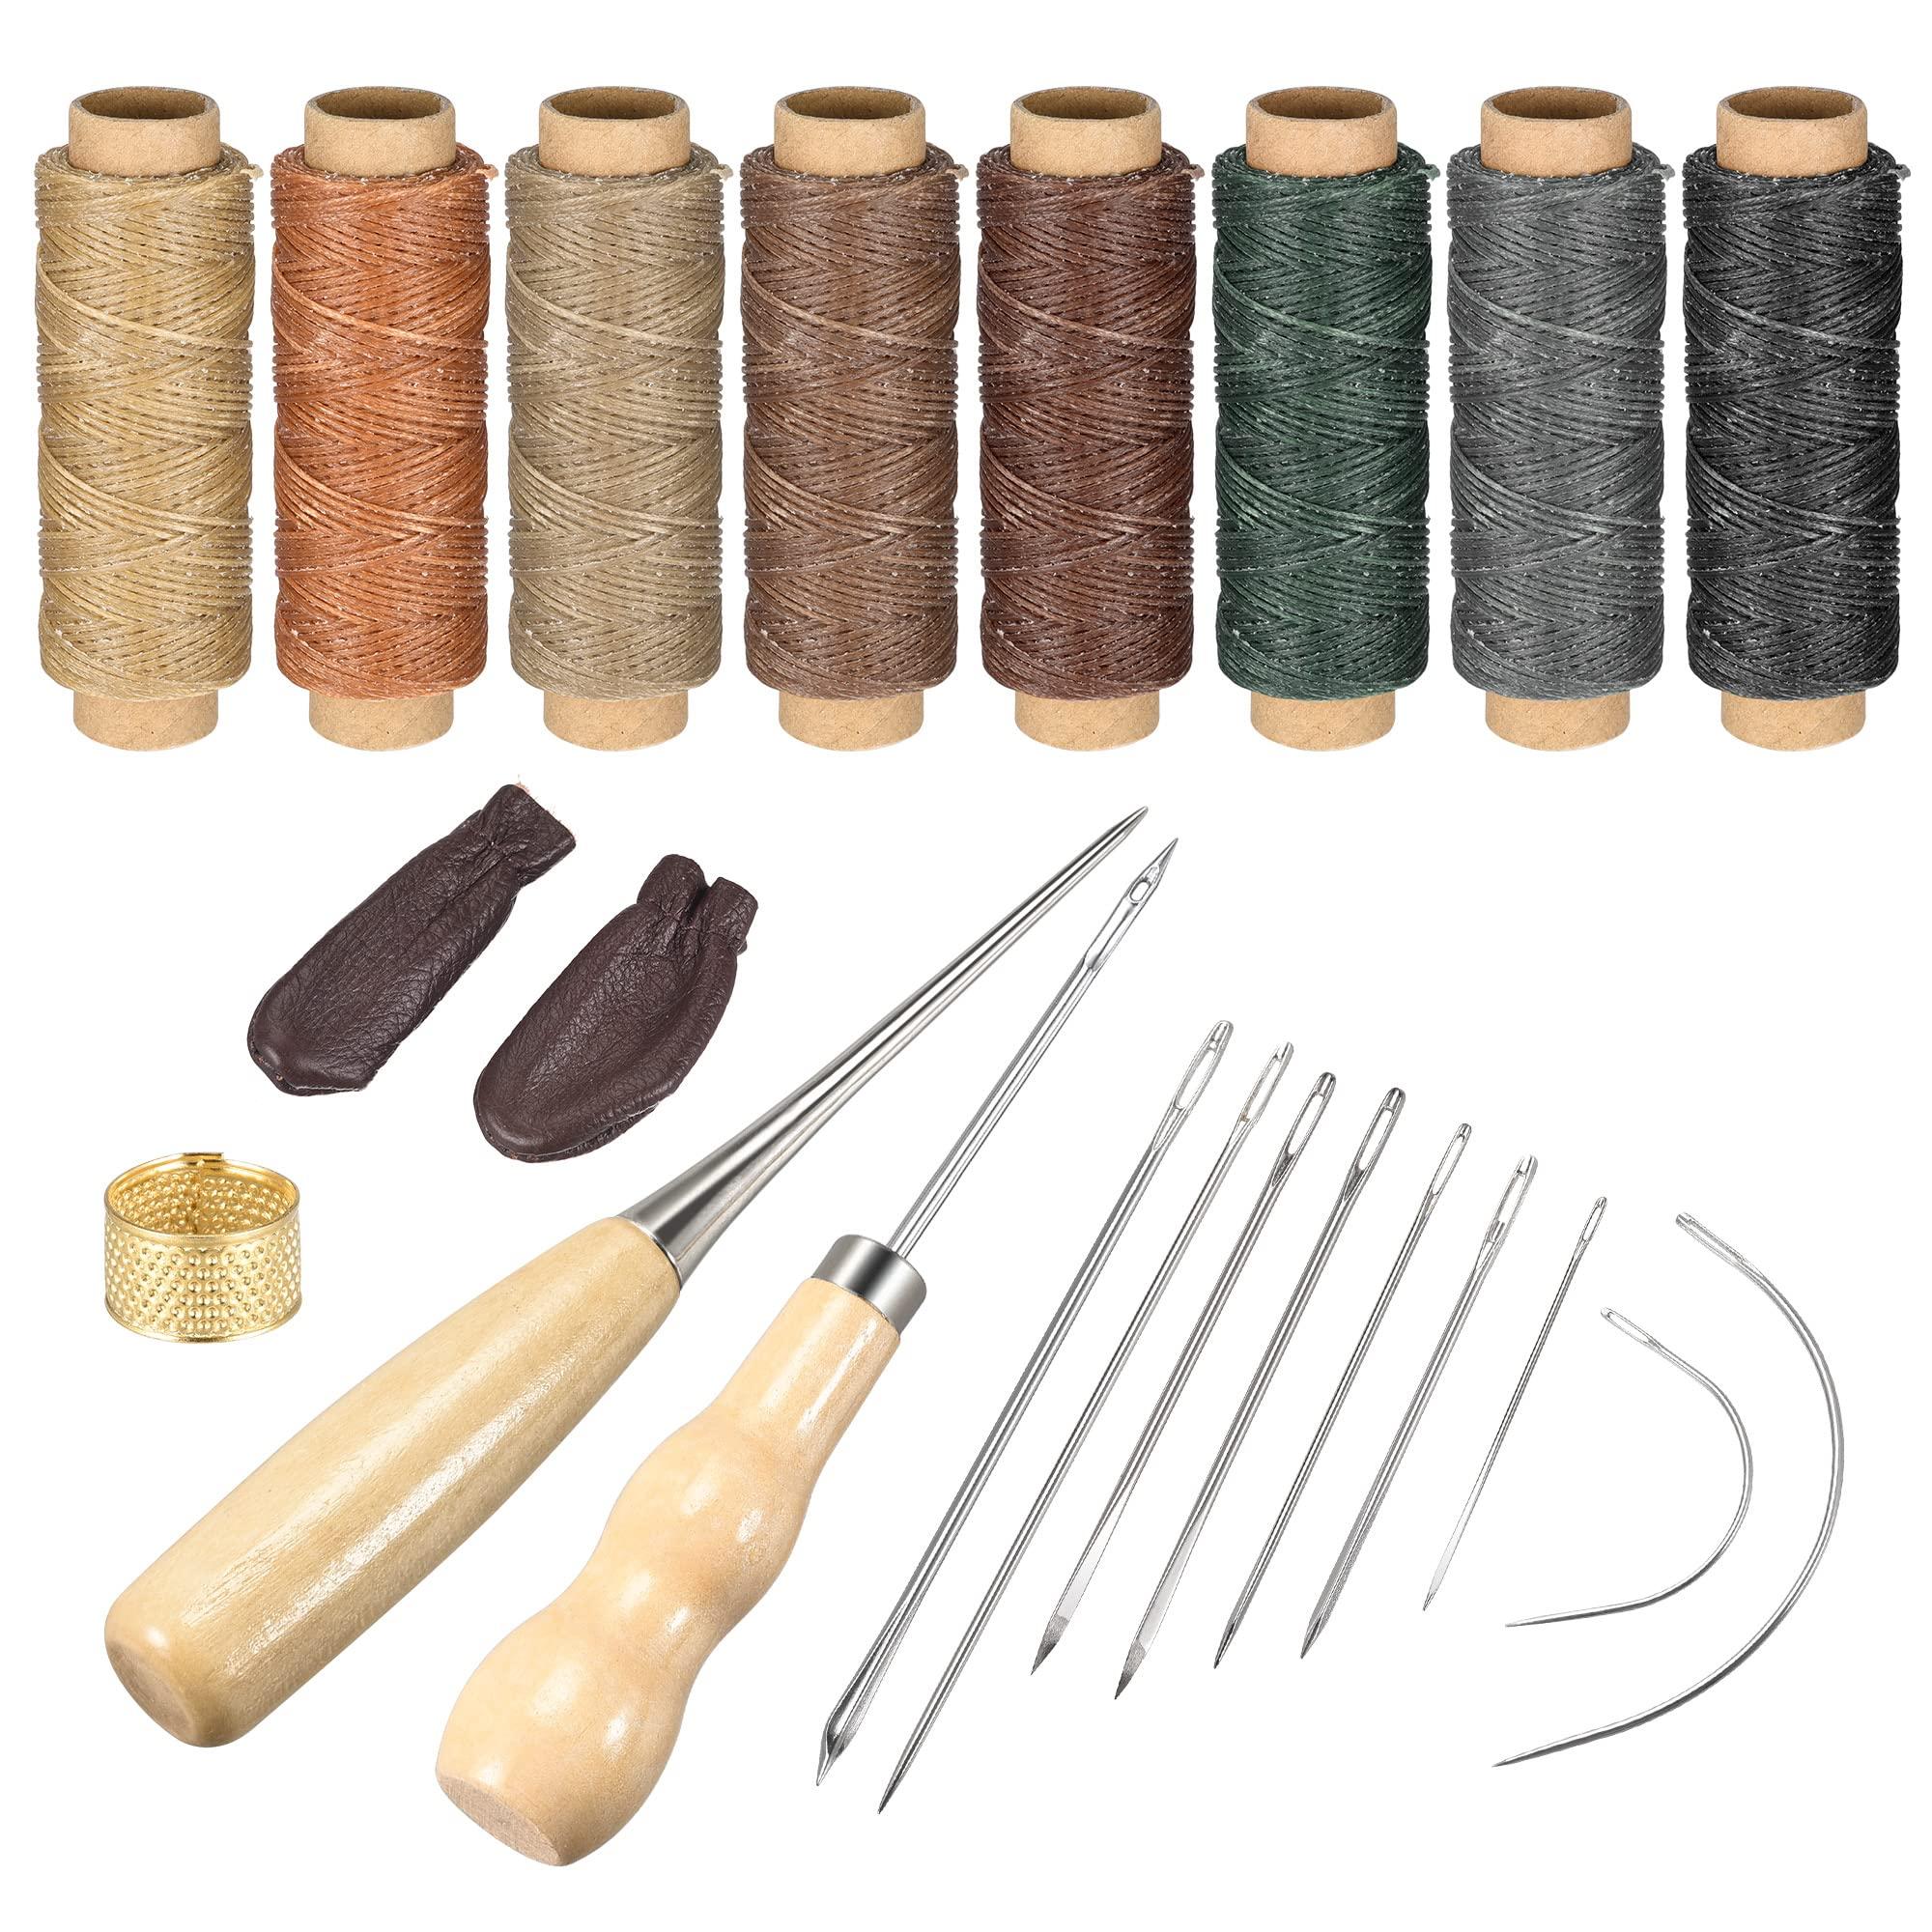 sourcing map Leather Sewing Threads Hand Stitching Tools Kit, Includes 8 Colors Waxed Flat Cord, Sewing Needles, Stitching Awls, Thimble 0